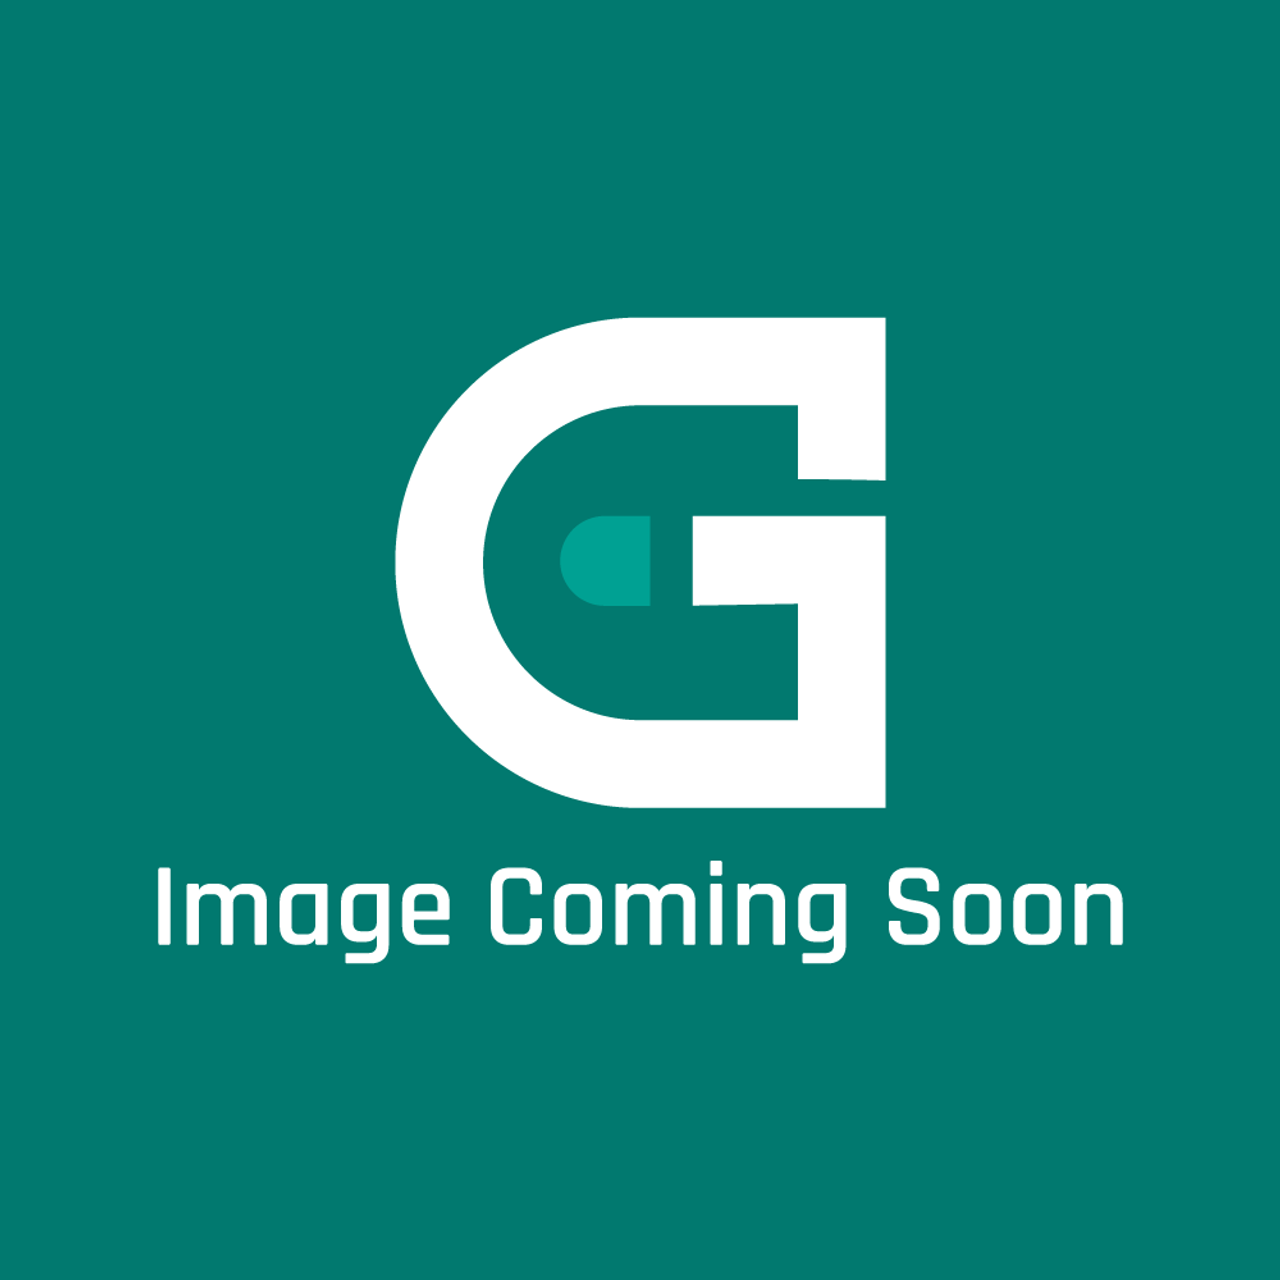 AGA Marvel AG2M212444 - Vent Fan Cover Plate - Image Coming Soon!